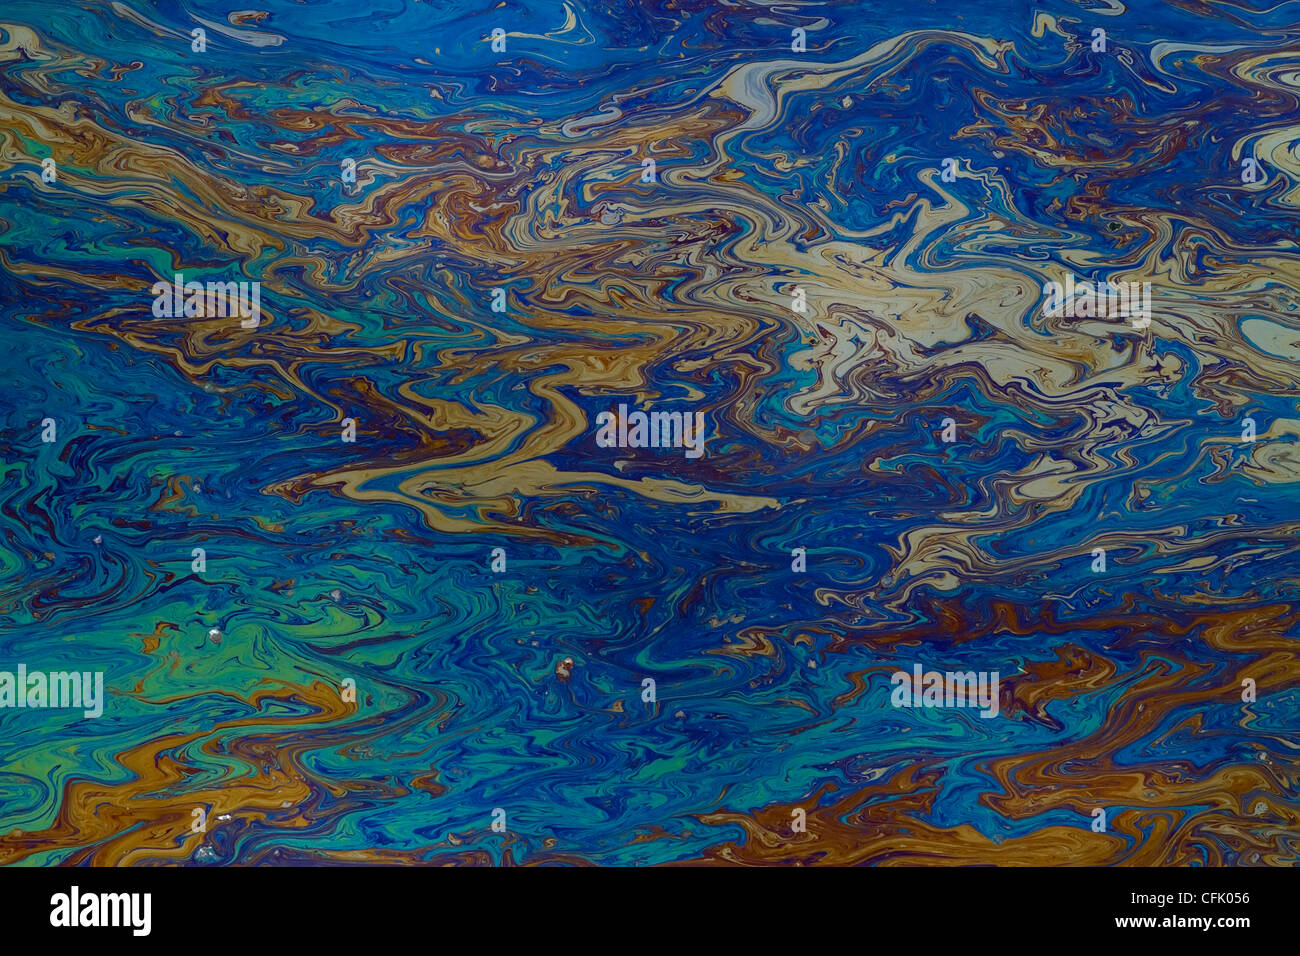 background of an oil slick on water showing the brilliant colors Stock Photo